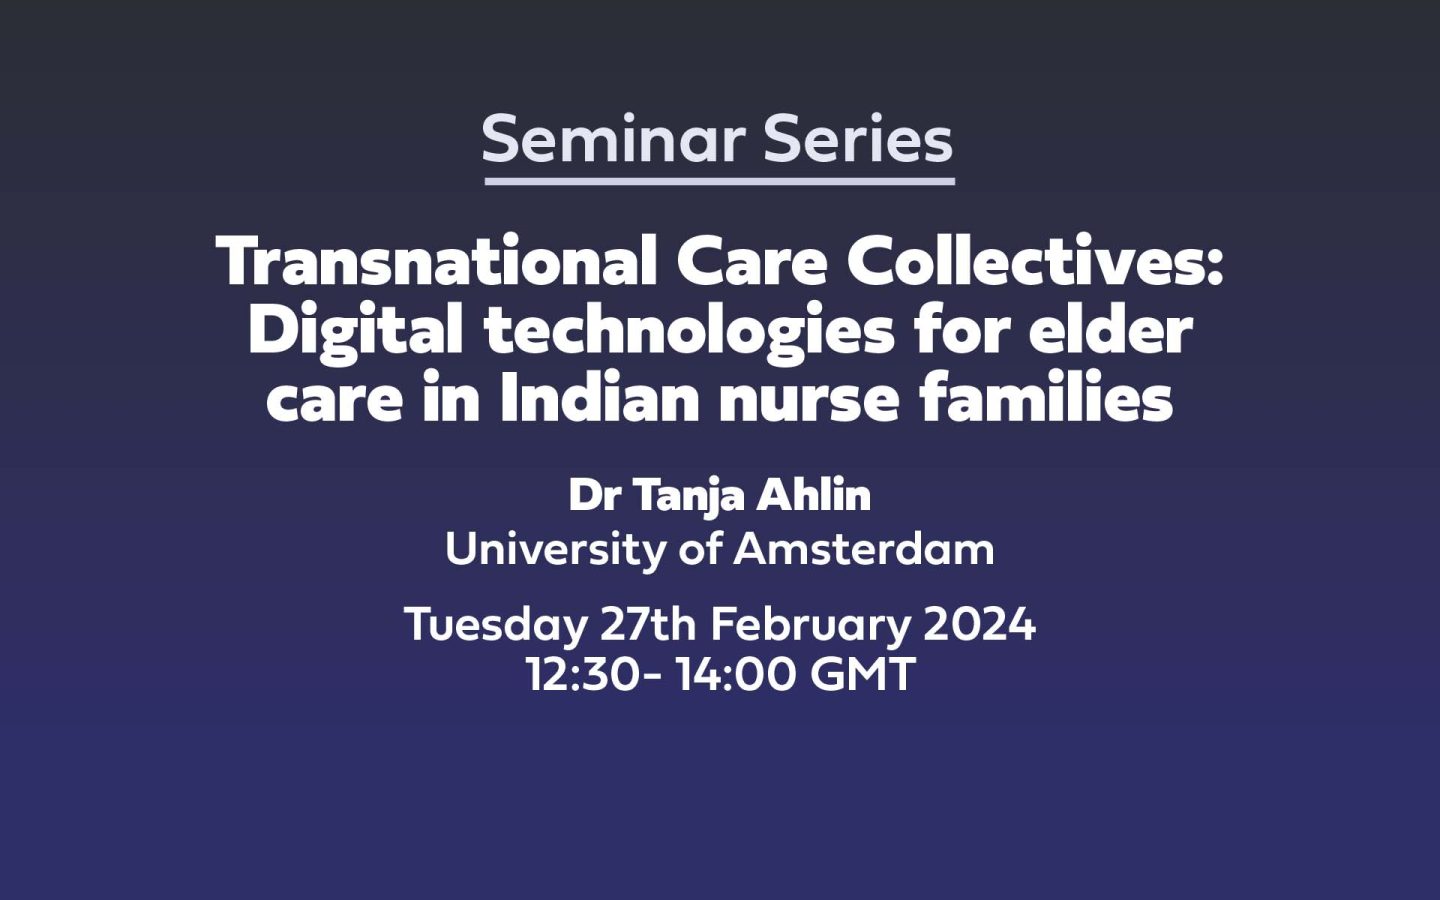 Text: Seminar Series Transnational Care Collectives: Digital technologies for elder care in Indian nurse families Dr Tanja Ahlin University of Amsterdam Tuesday 27th February 2024 12:30- 14:00 GMT